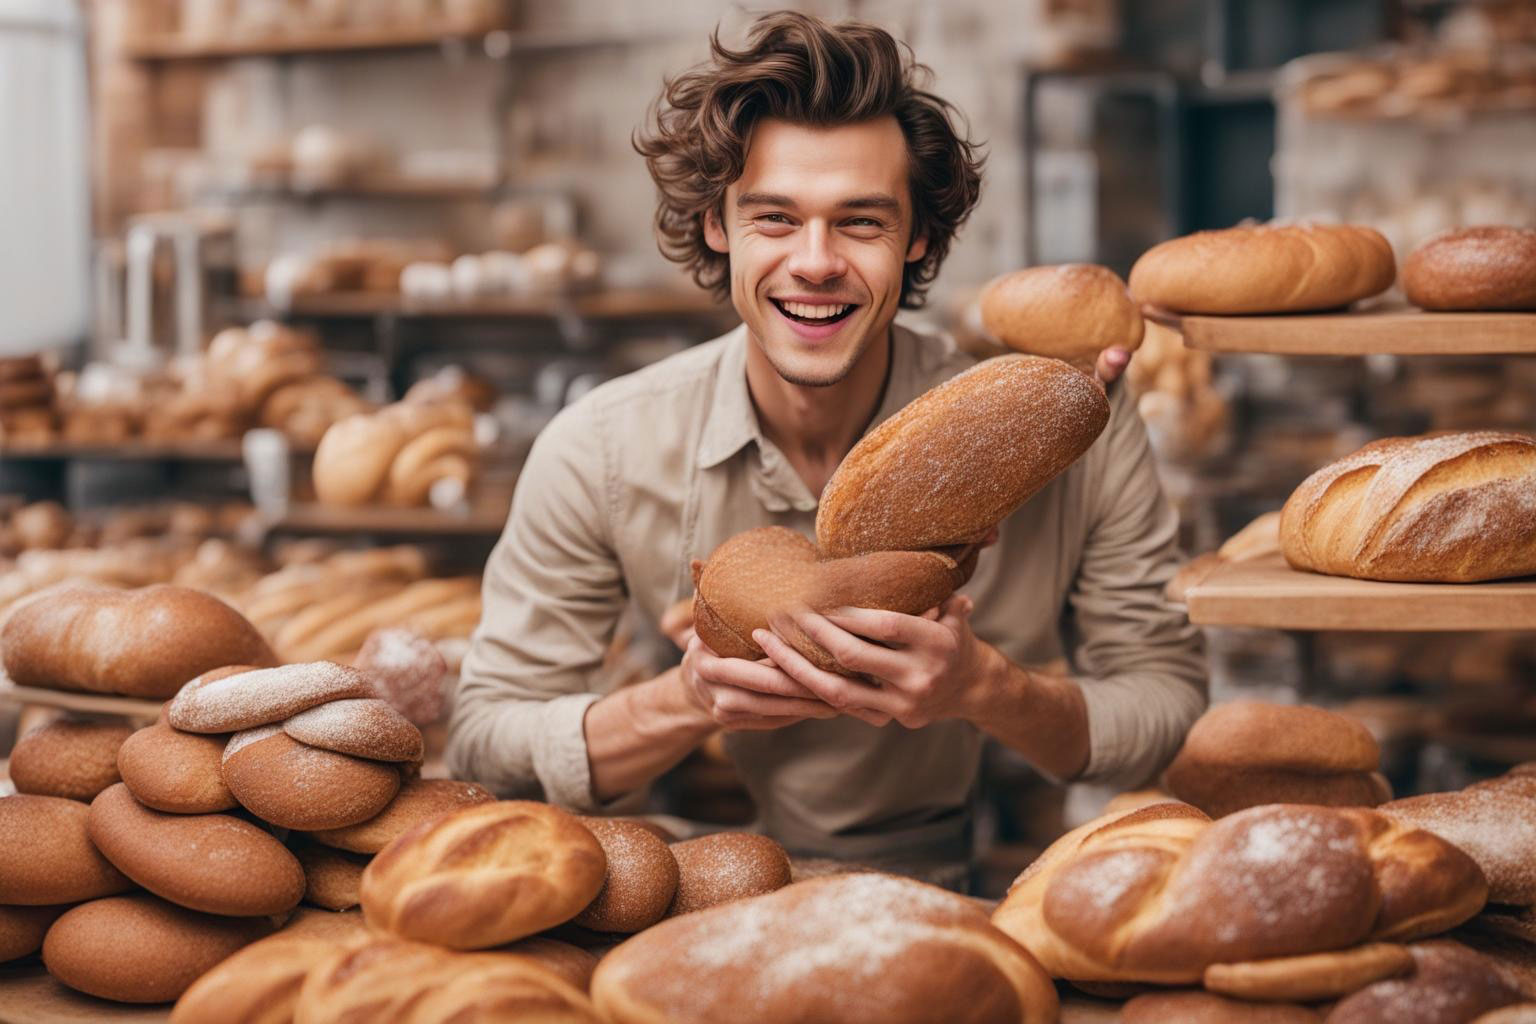 You got 20 out of 24! The Ultimate Bread Quiz! 🍞 Only Bread Lovers With Genius IQ Can Ace This Bread Trivia Quiz